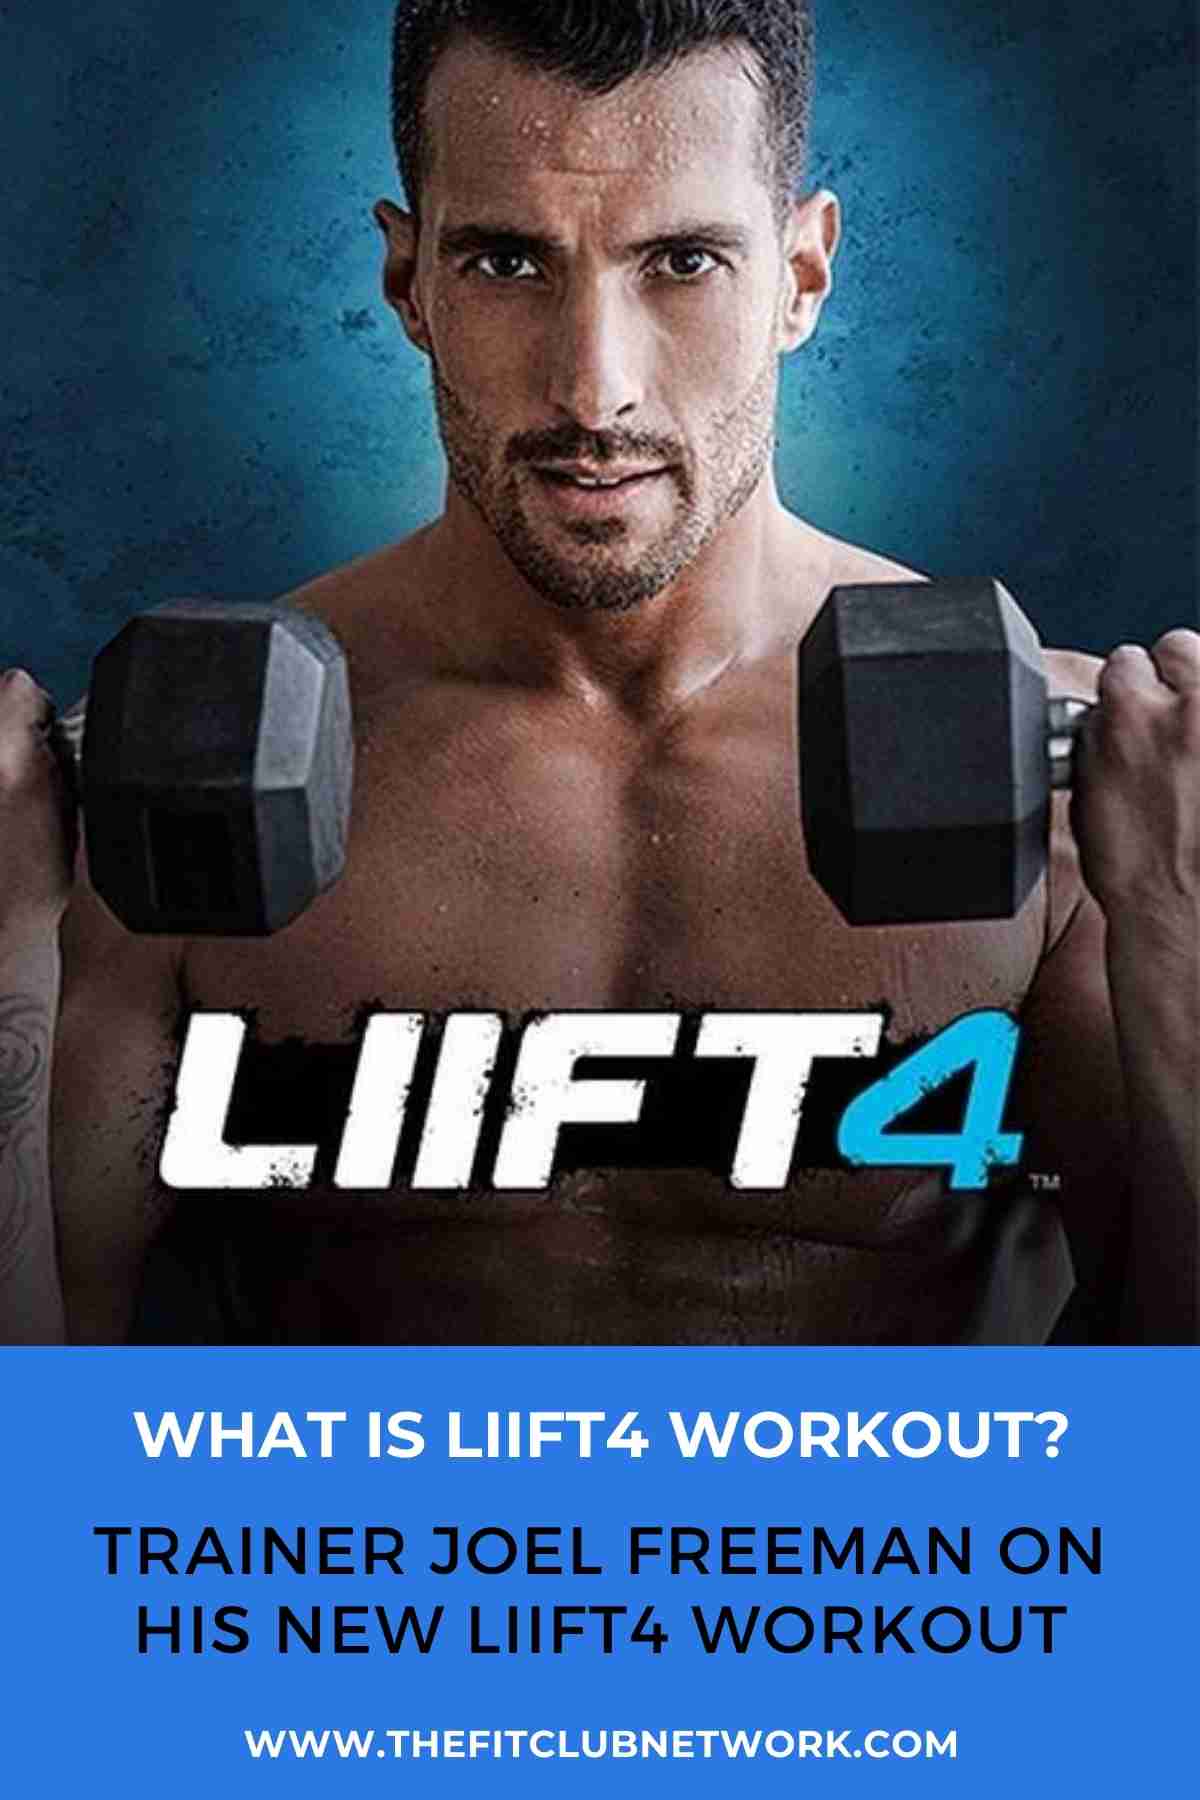 Trainer Joel Freeman on His New LIIFT4 Workout